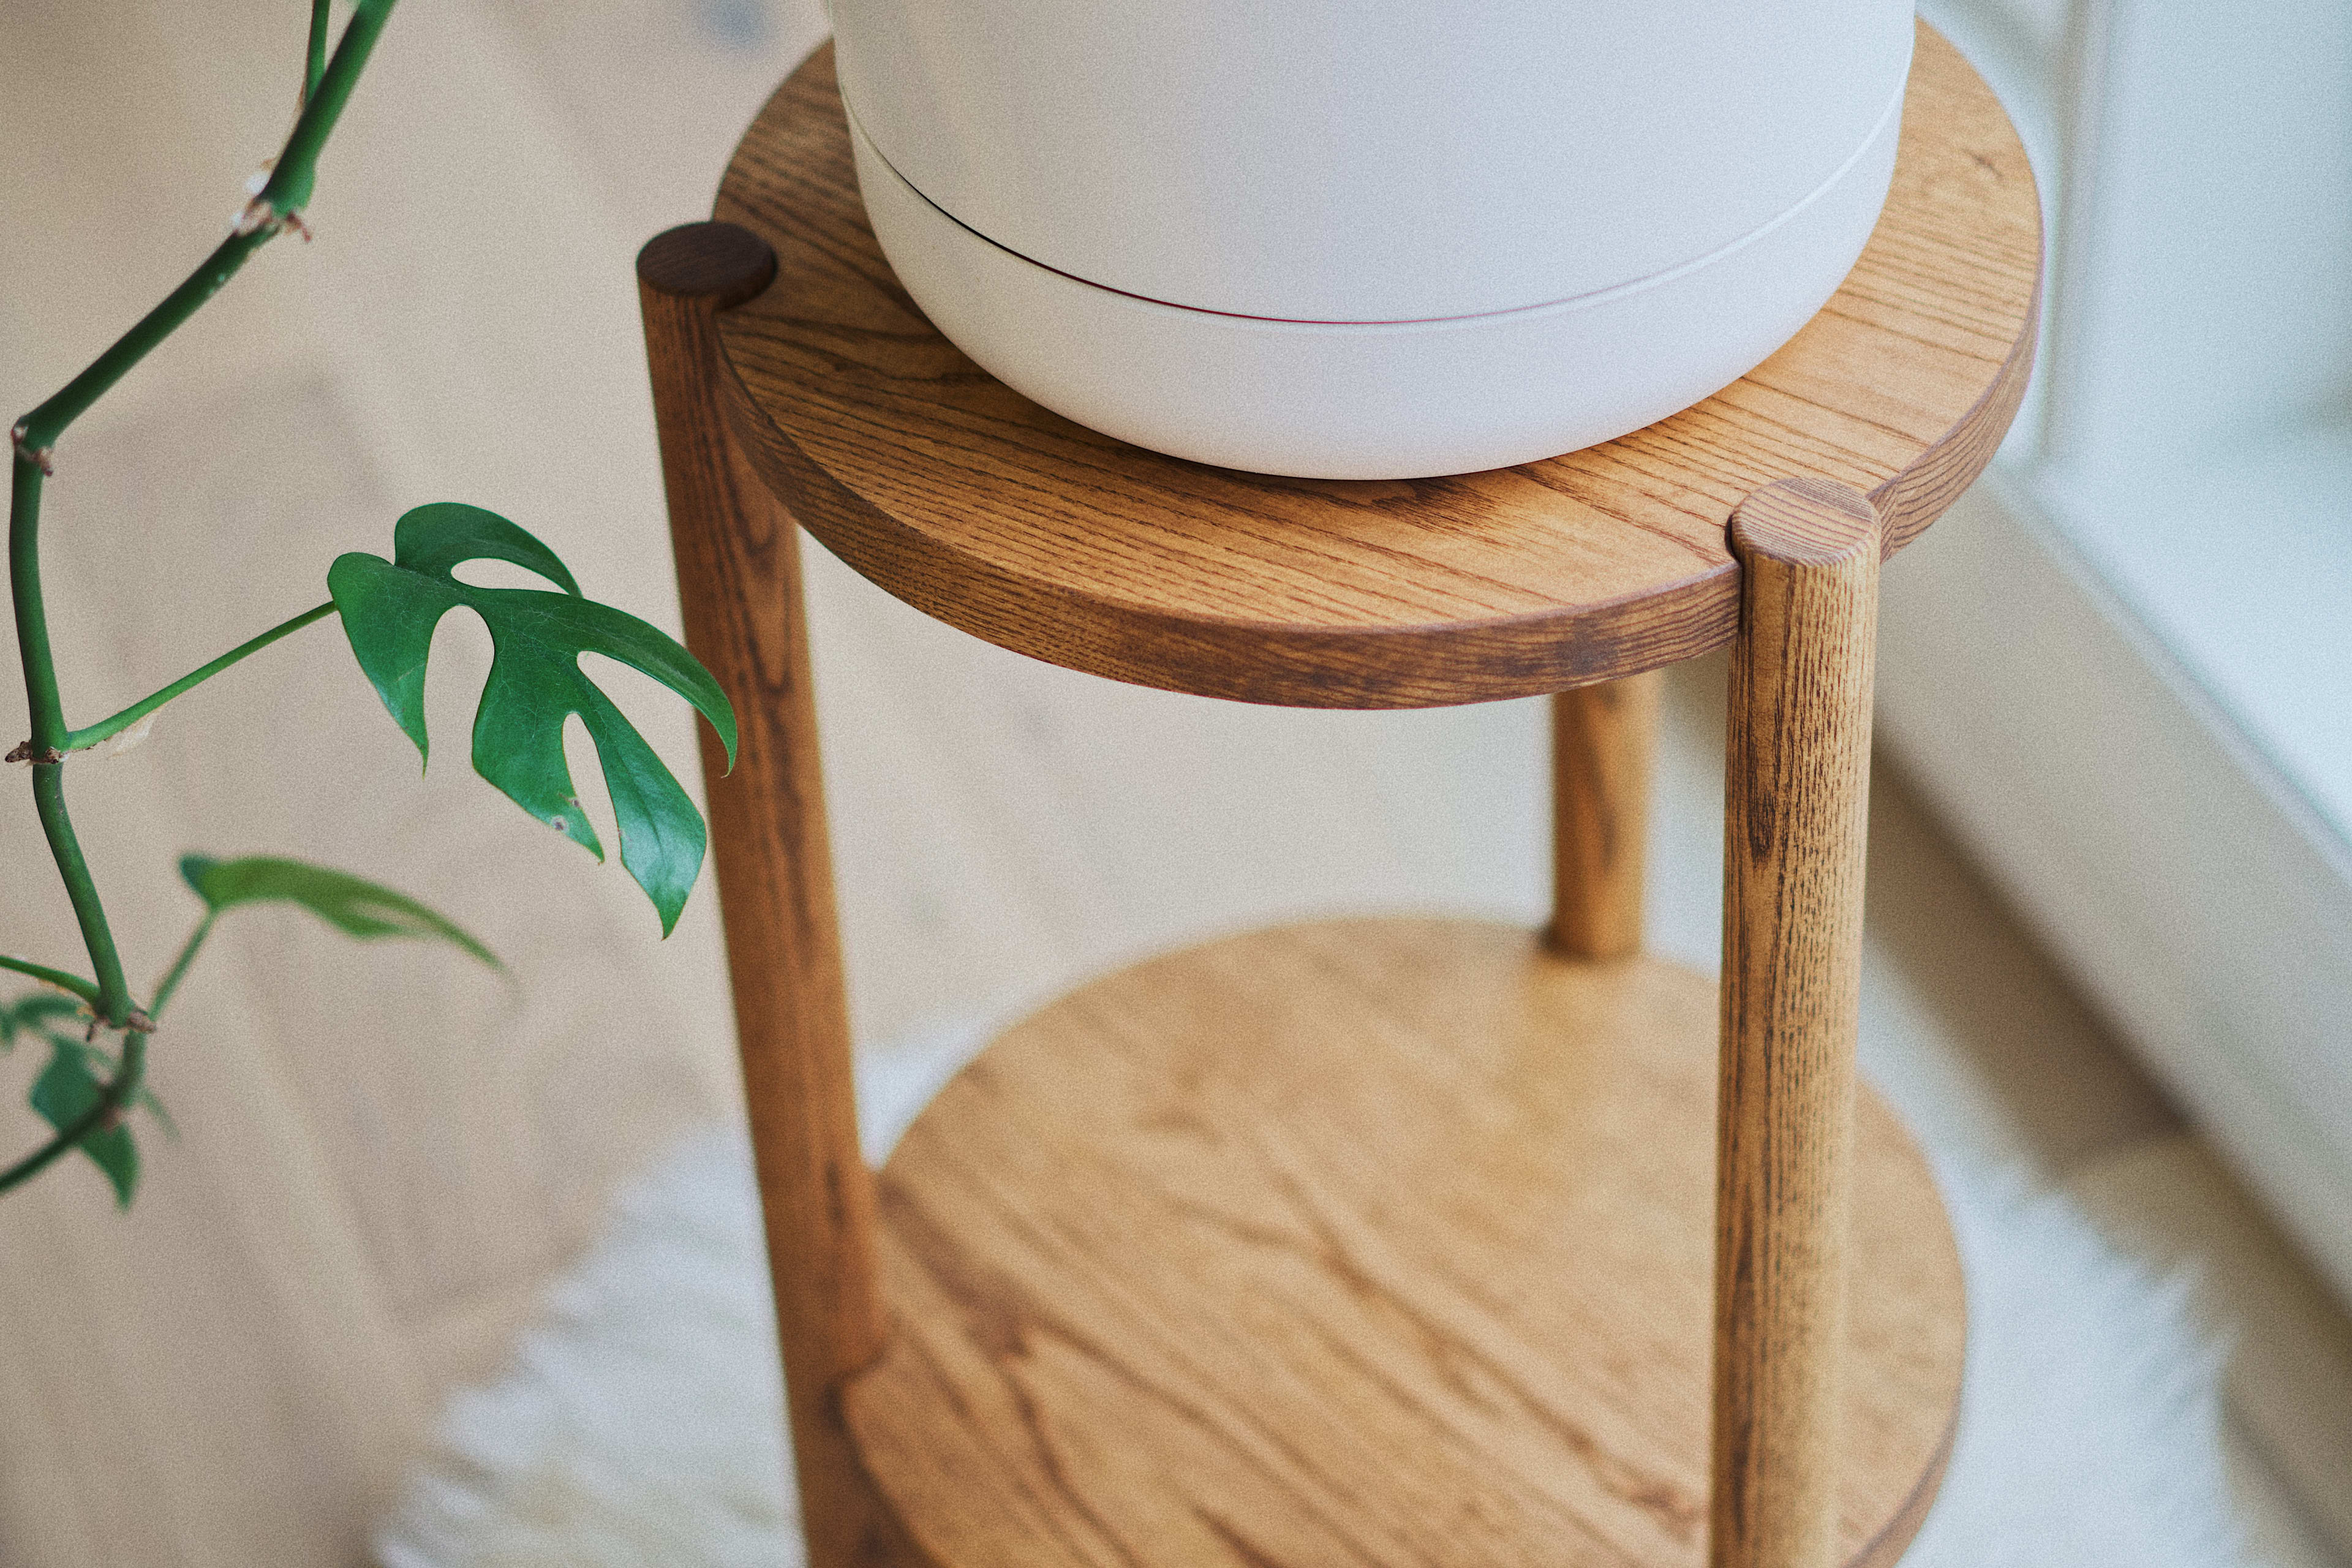 A minimal beige potted plant on a wooden stand for a product photoshoot.